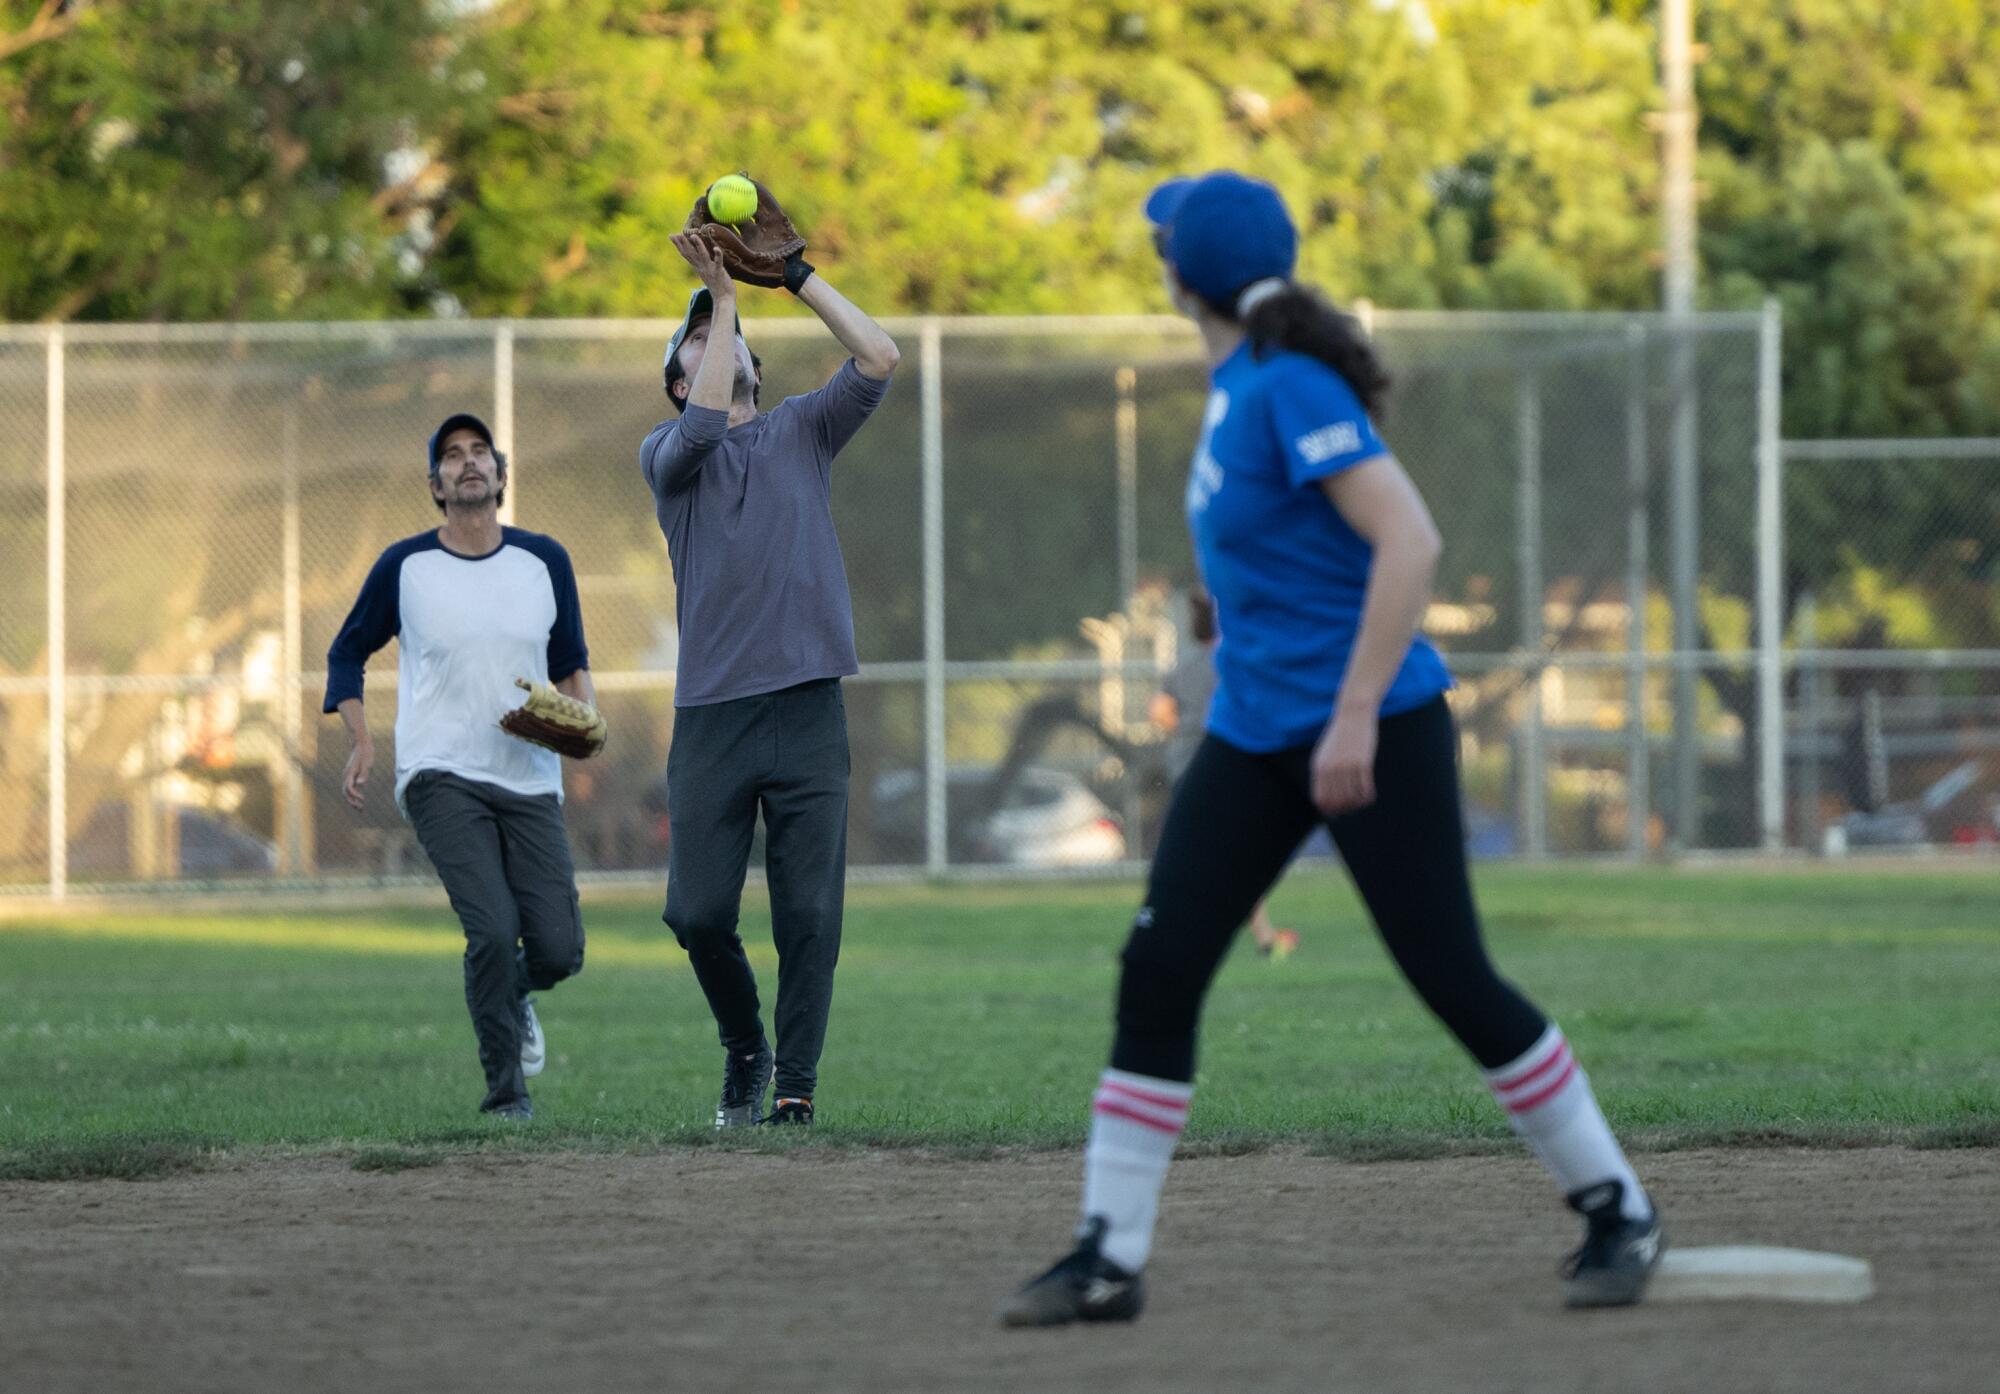 A person catches a softball with a mitt as two people watch.